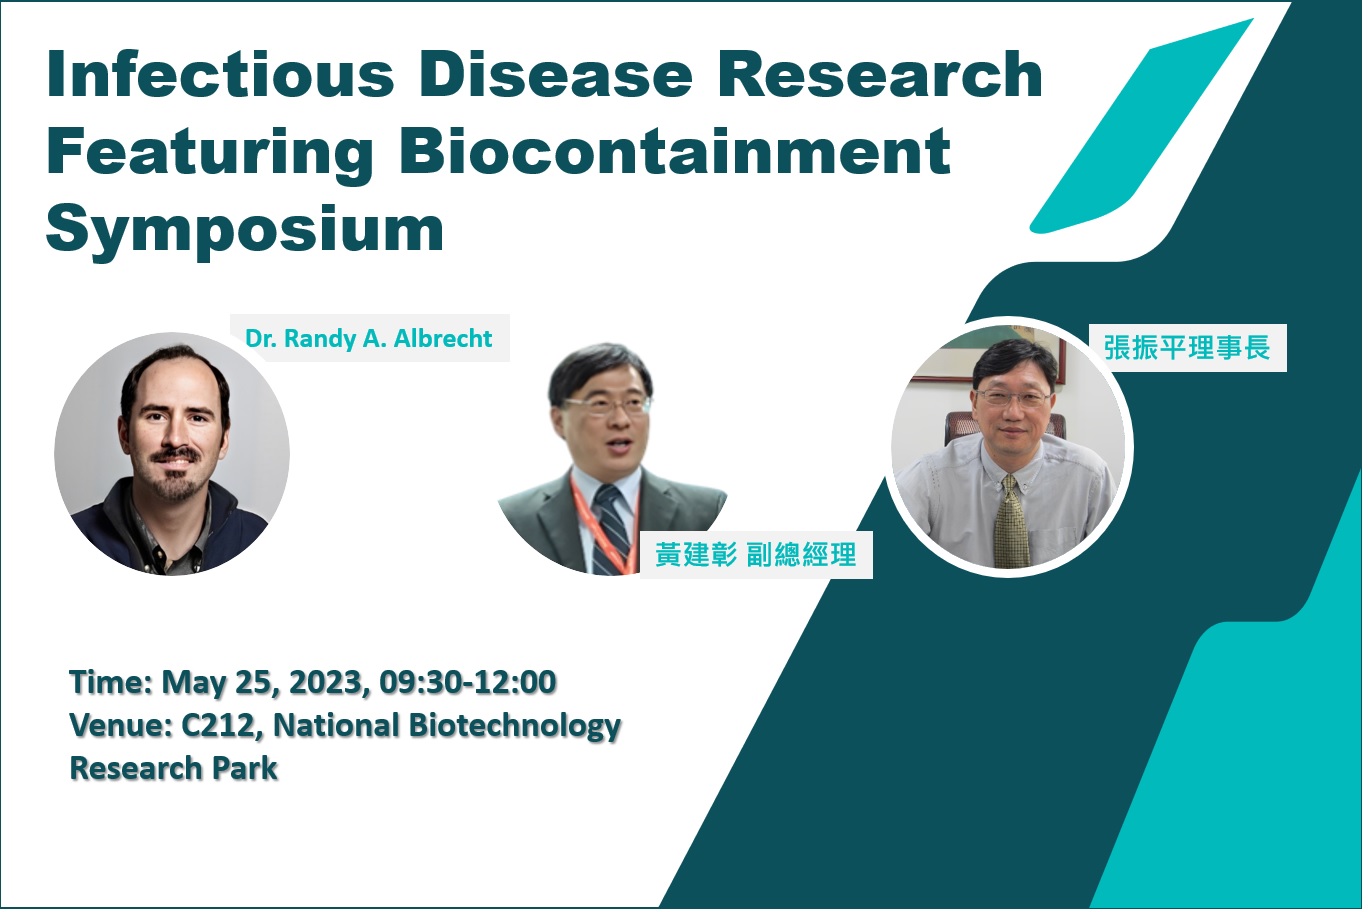 Infectious Disease Research Featuring Biocontainment Symposium